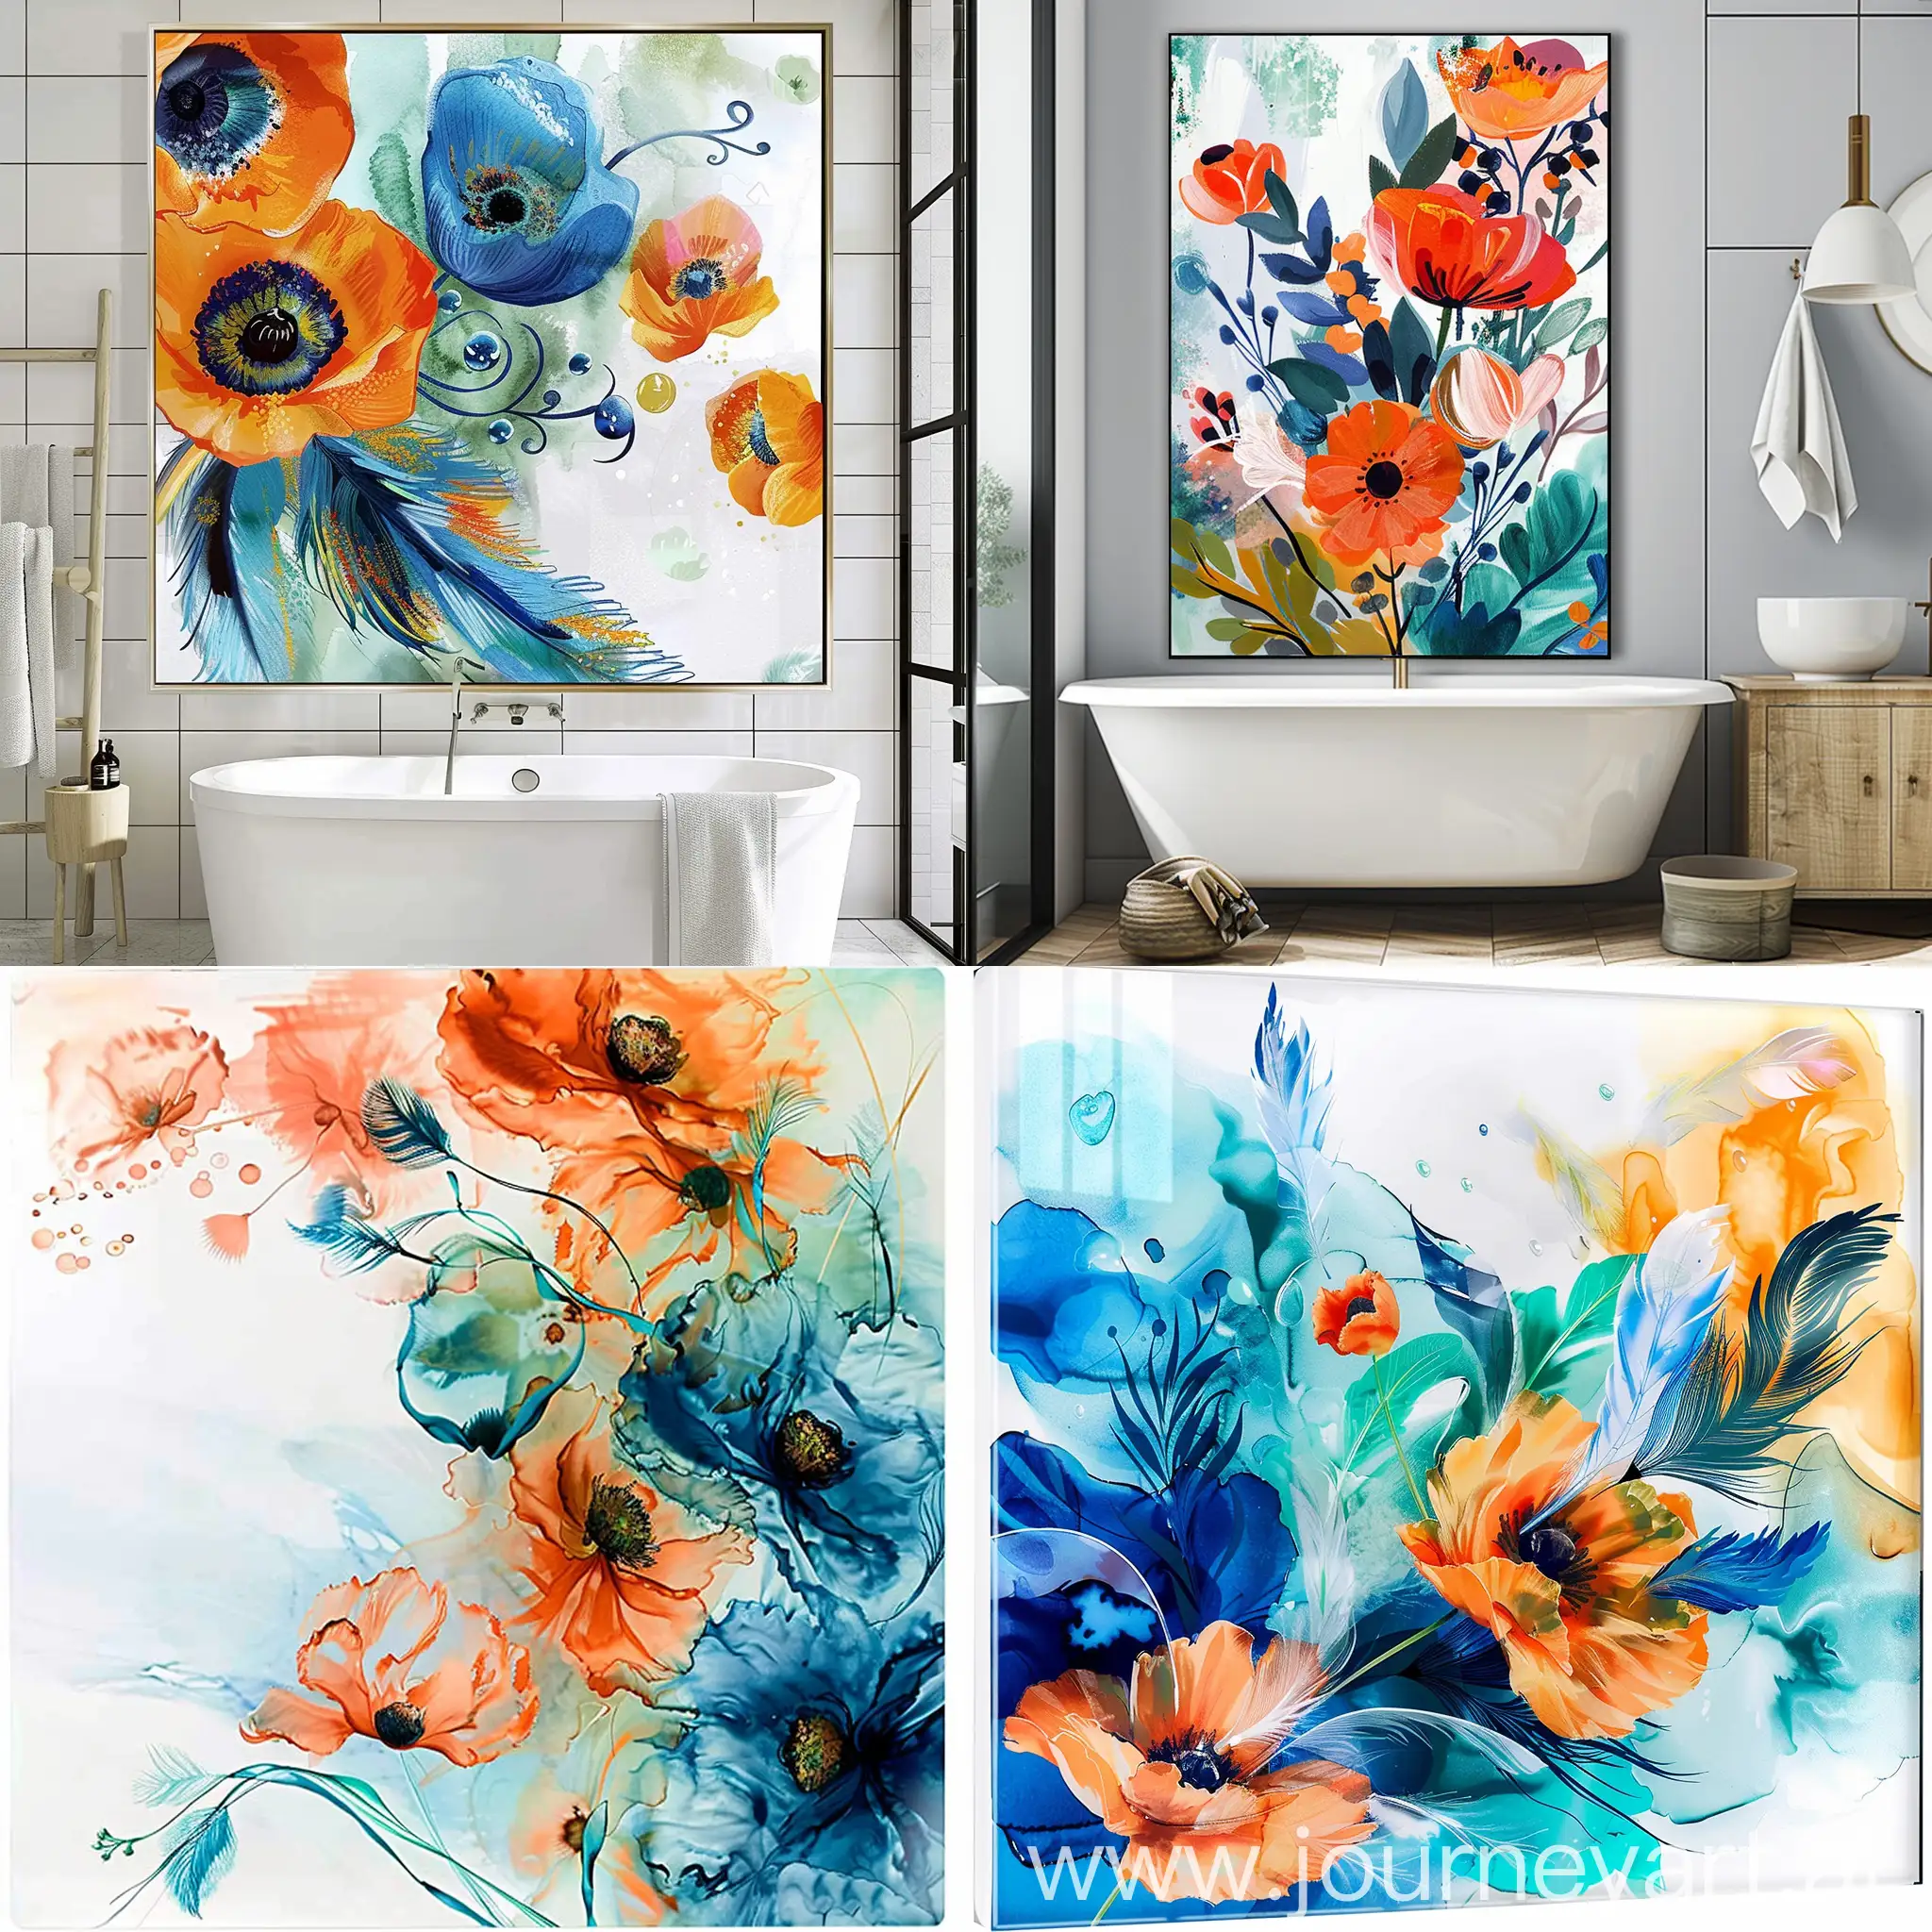 Colorful Bathroom Décor, Blue Orange Green White, Boho Floral Abstract, Poppies Posies Flowers Feathers Aesthetic Water colors look